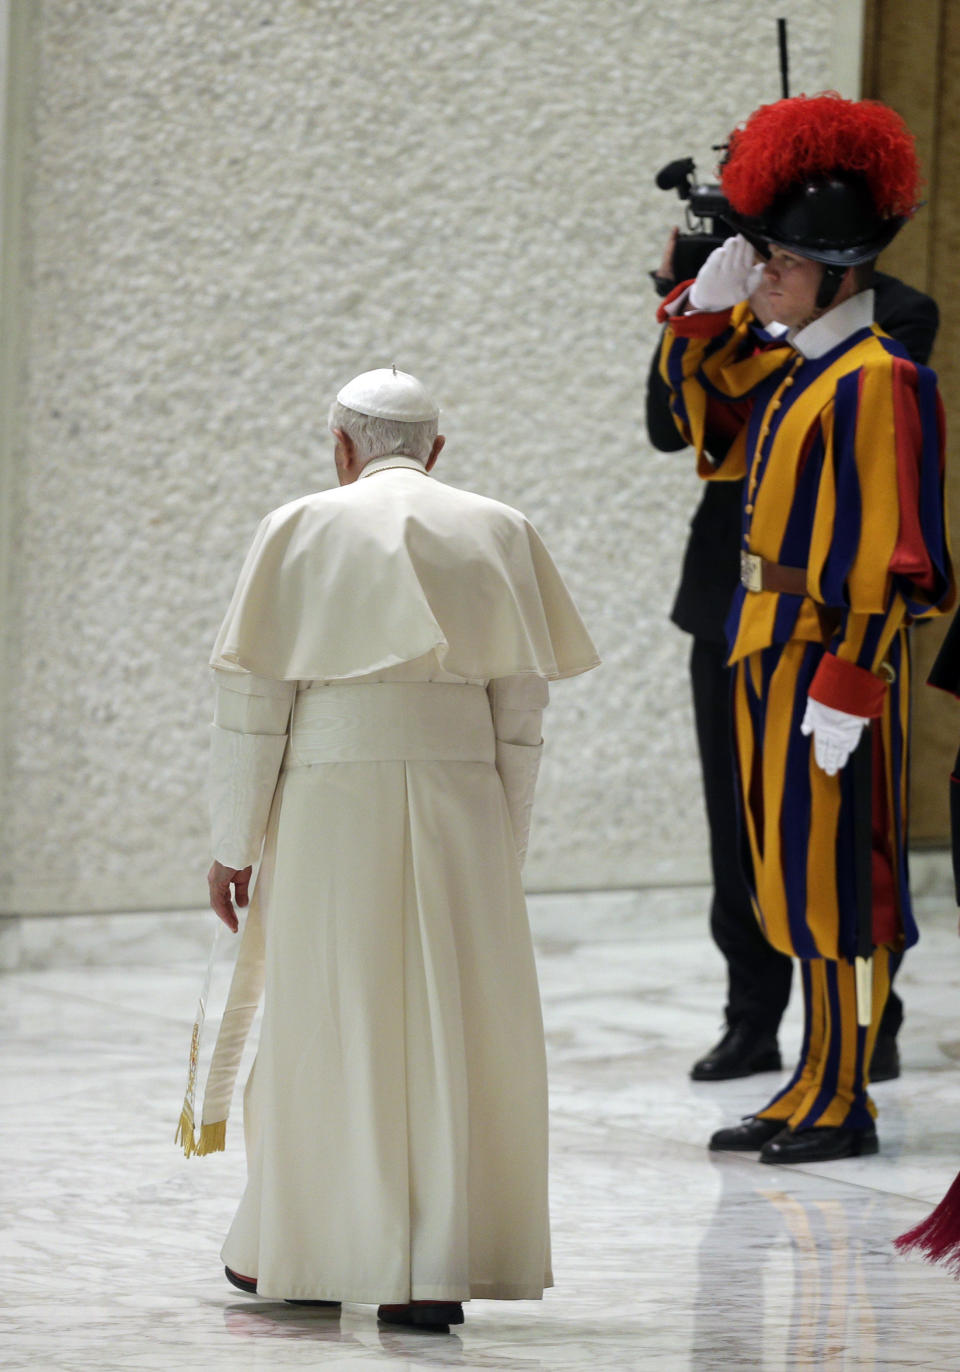 FILE - Pope Benedict XVI walks past a Swiss guard on Feb. 13, 2013, as he leaves at the end of his weekly general audience, his first public appearance since dropping the bombshell announcement of his resignation, in the Paul VI Hall at the Vatican. Benedict chose Feb. 11, 2013 -- a Vatican holiday, with a routine audience with his cardinals -- to make the historic announcement in Latin that he would become the first pope since Gregory XII in 1415 to resign. Benedict, the German theologian who will be remembered as the first pope in 600 years to resign, has died, the Vatican announced Saturday Dec. 31, 2022. He was 95. (AP Photo/Alessandra Tarantino, File)